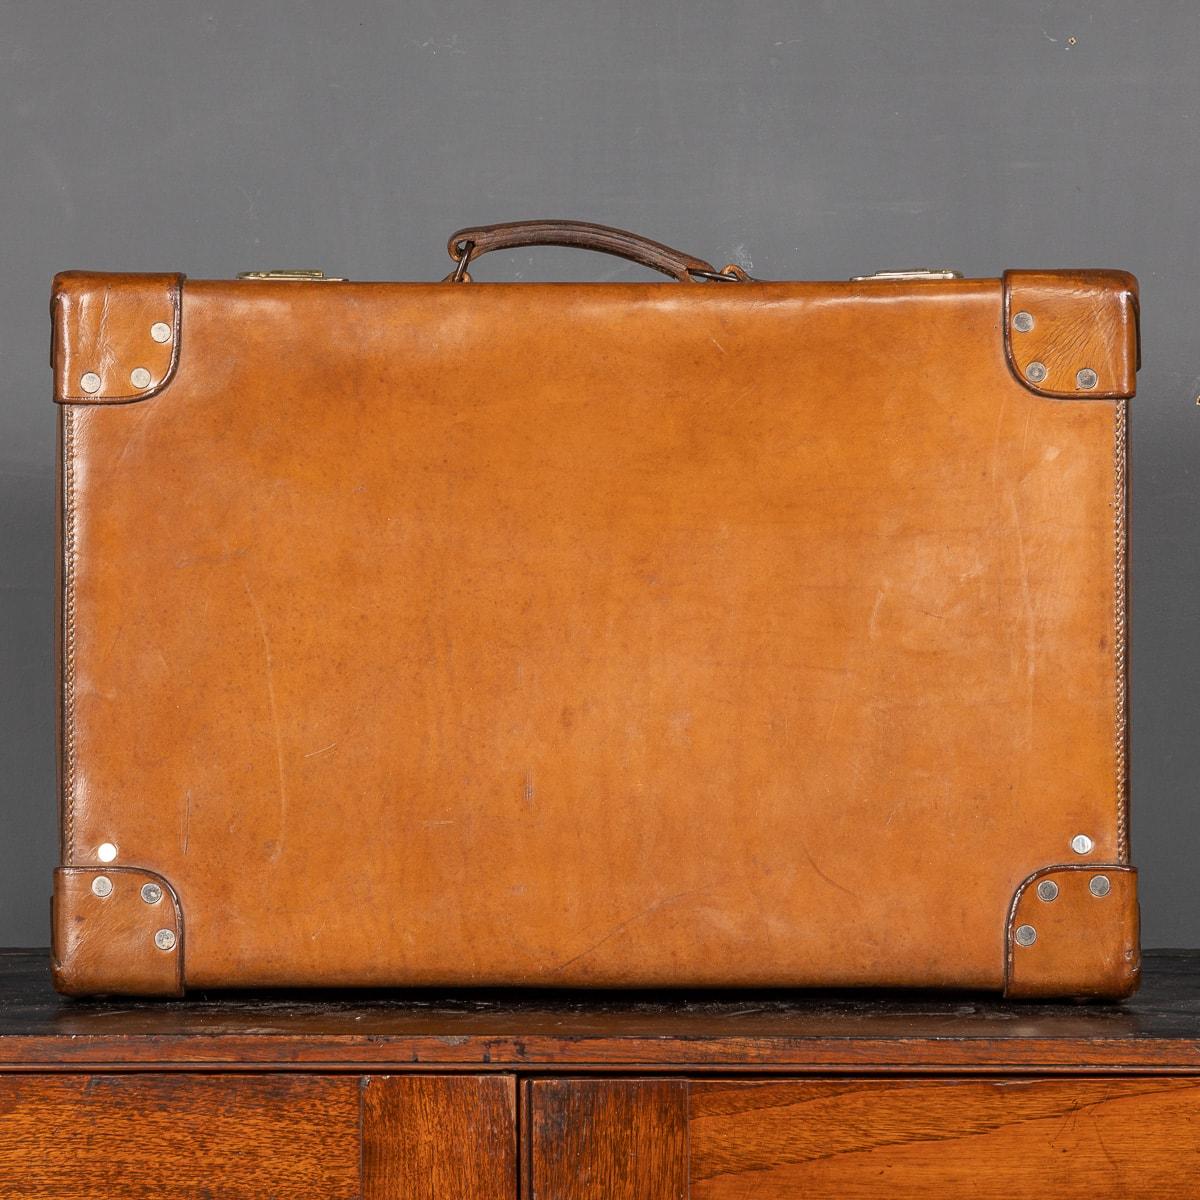 20th Century British Made Bridle Leather Suitcase, c.1910 For Sale 4